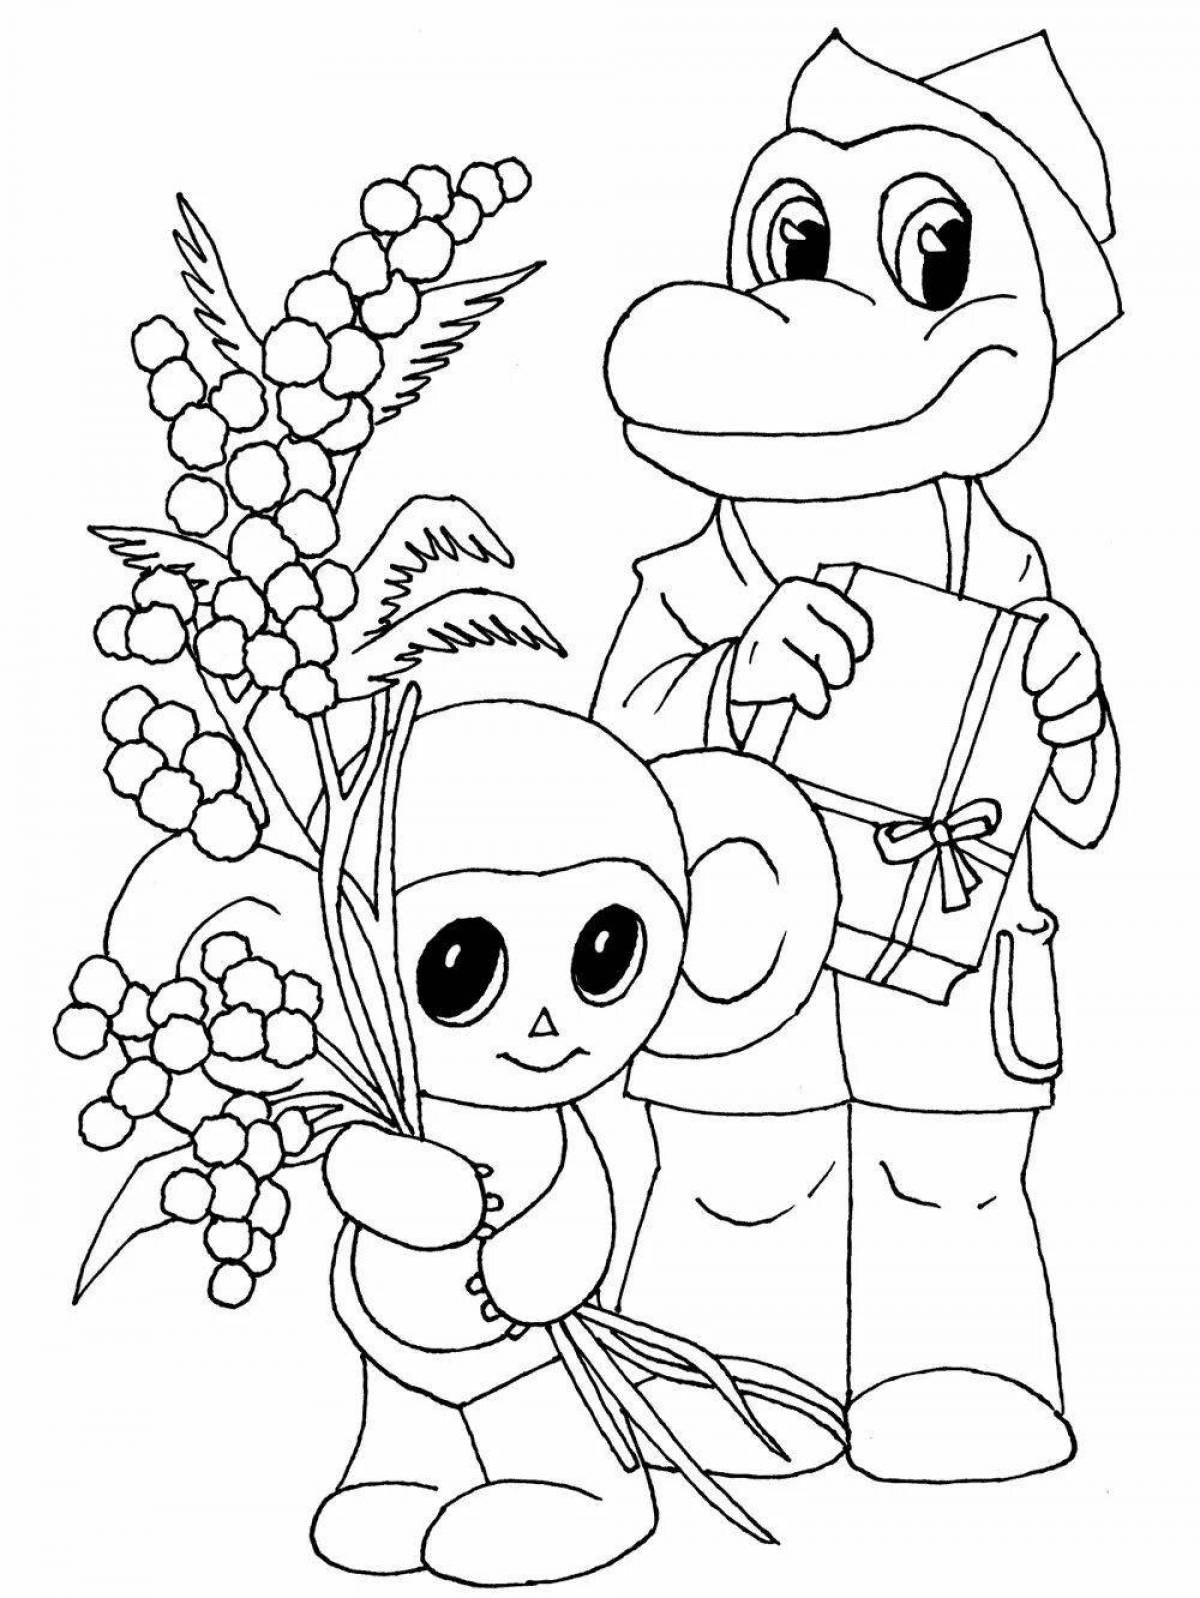 Cute aababy coloring book